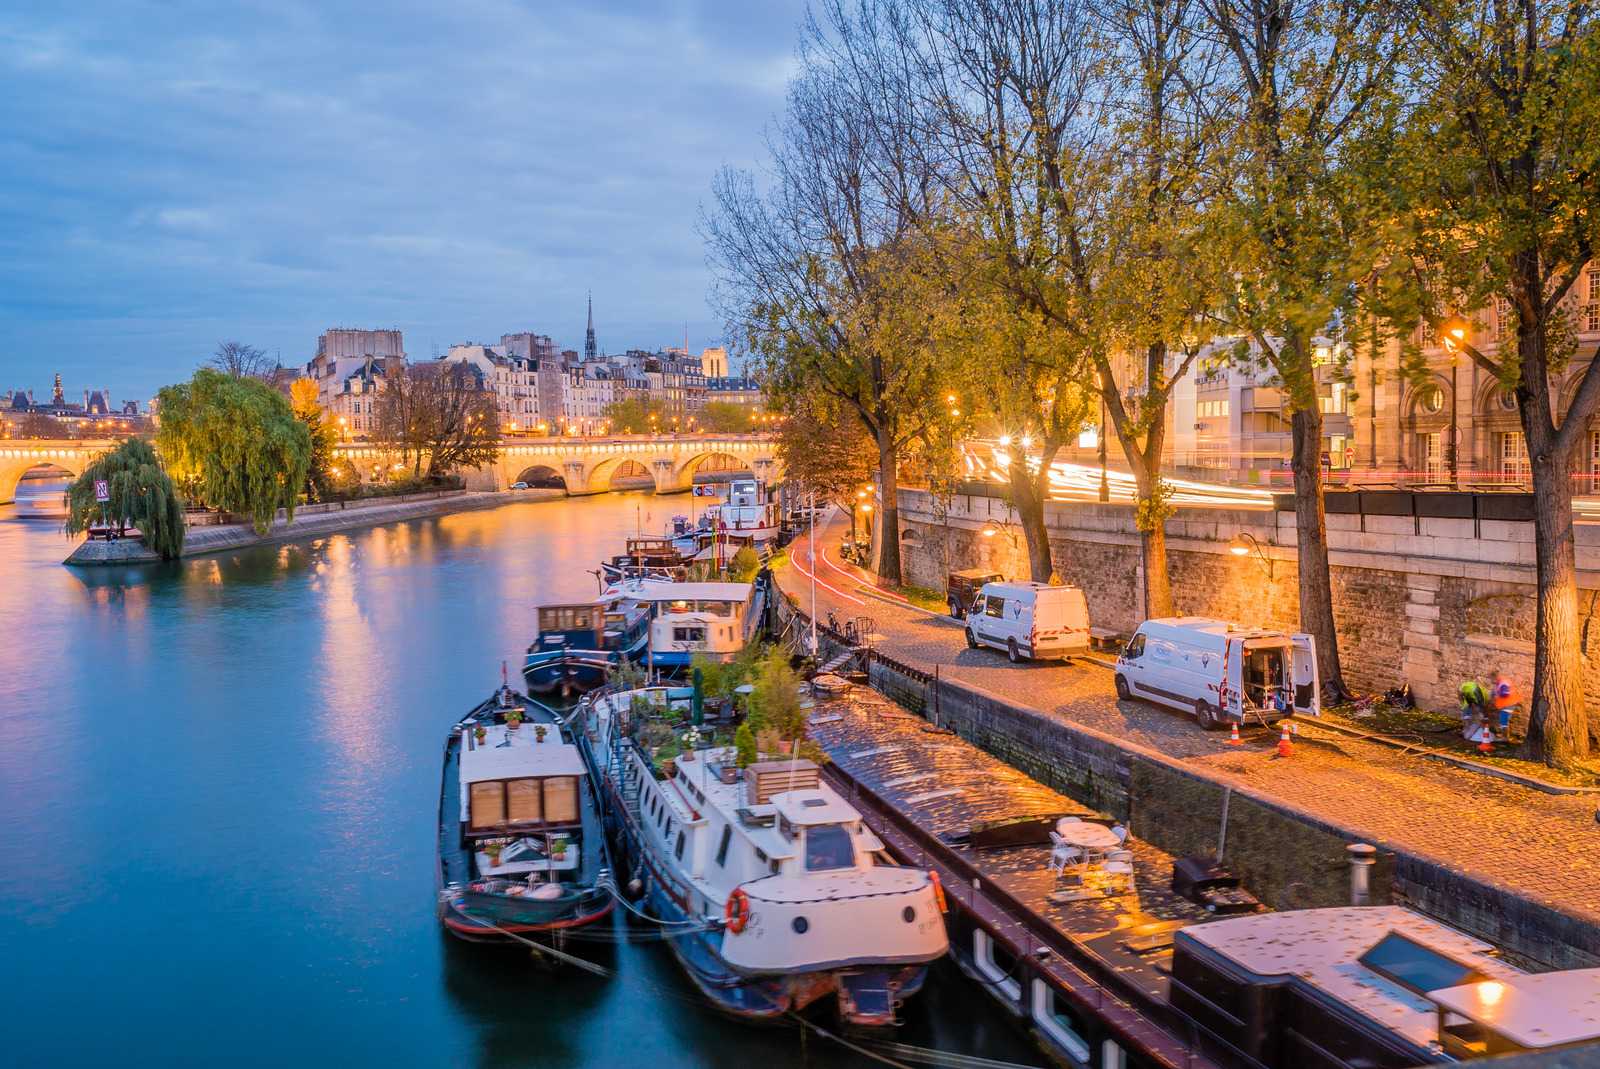 Seine River Night Cruise - Tickets, Price, tips and more!